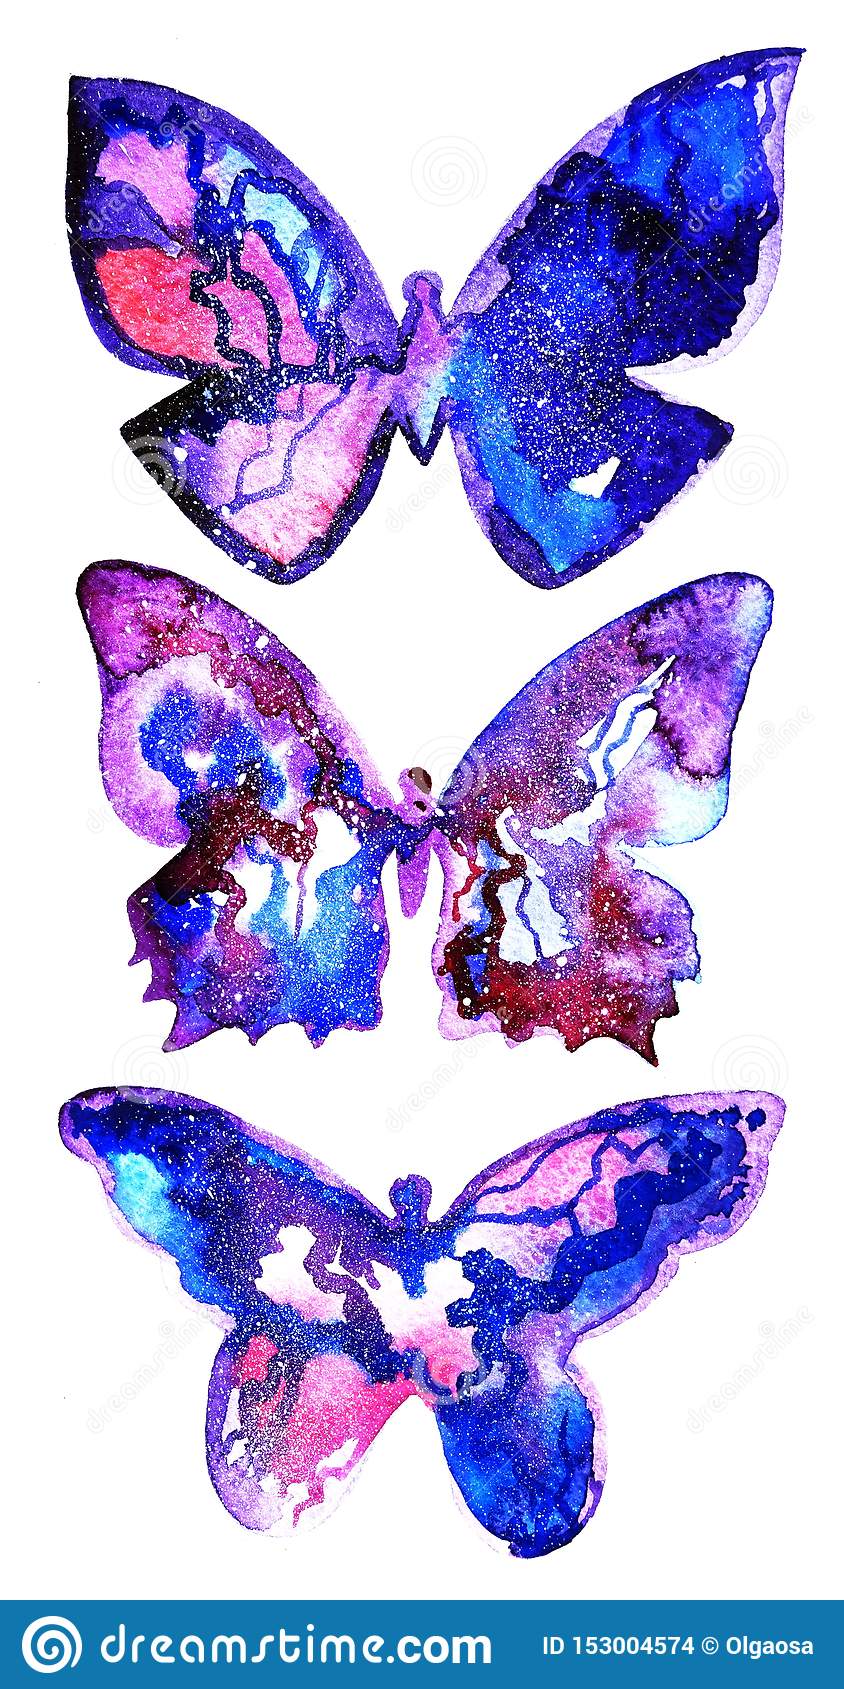 Butterfly Aesthetic Drawing Pics